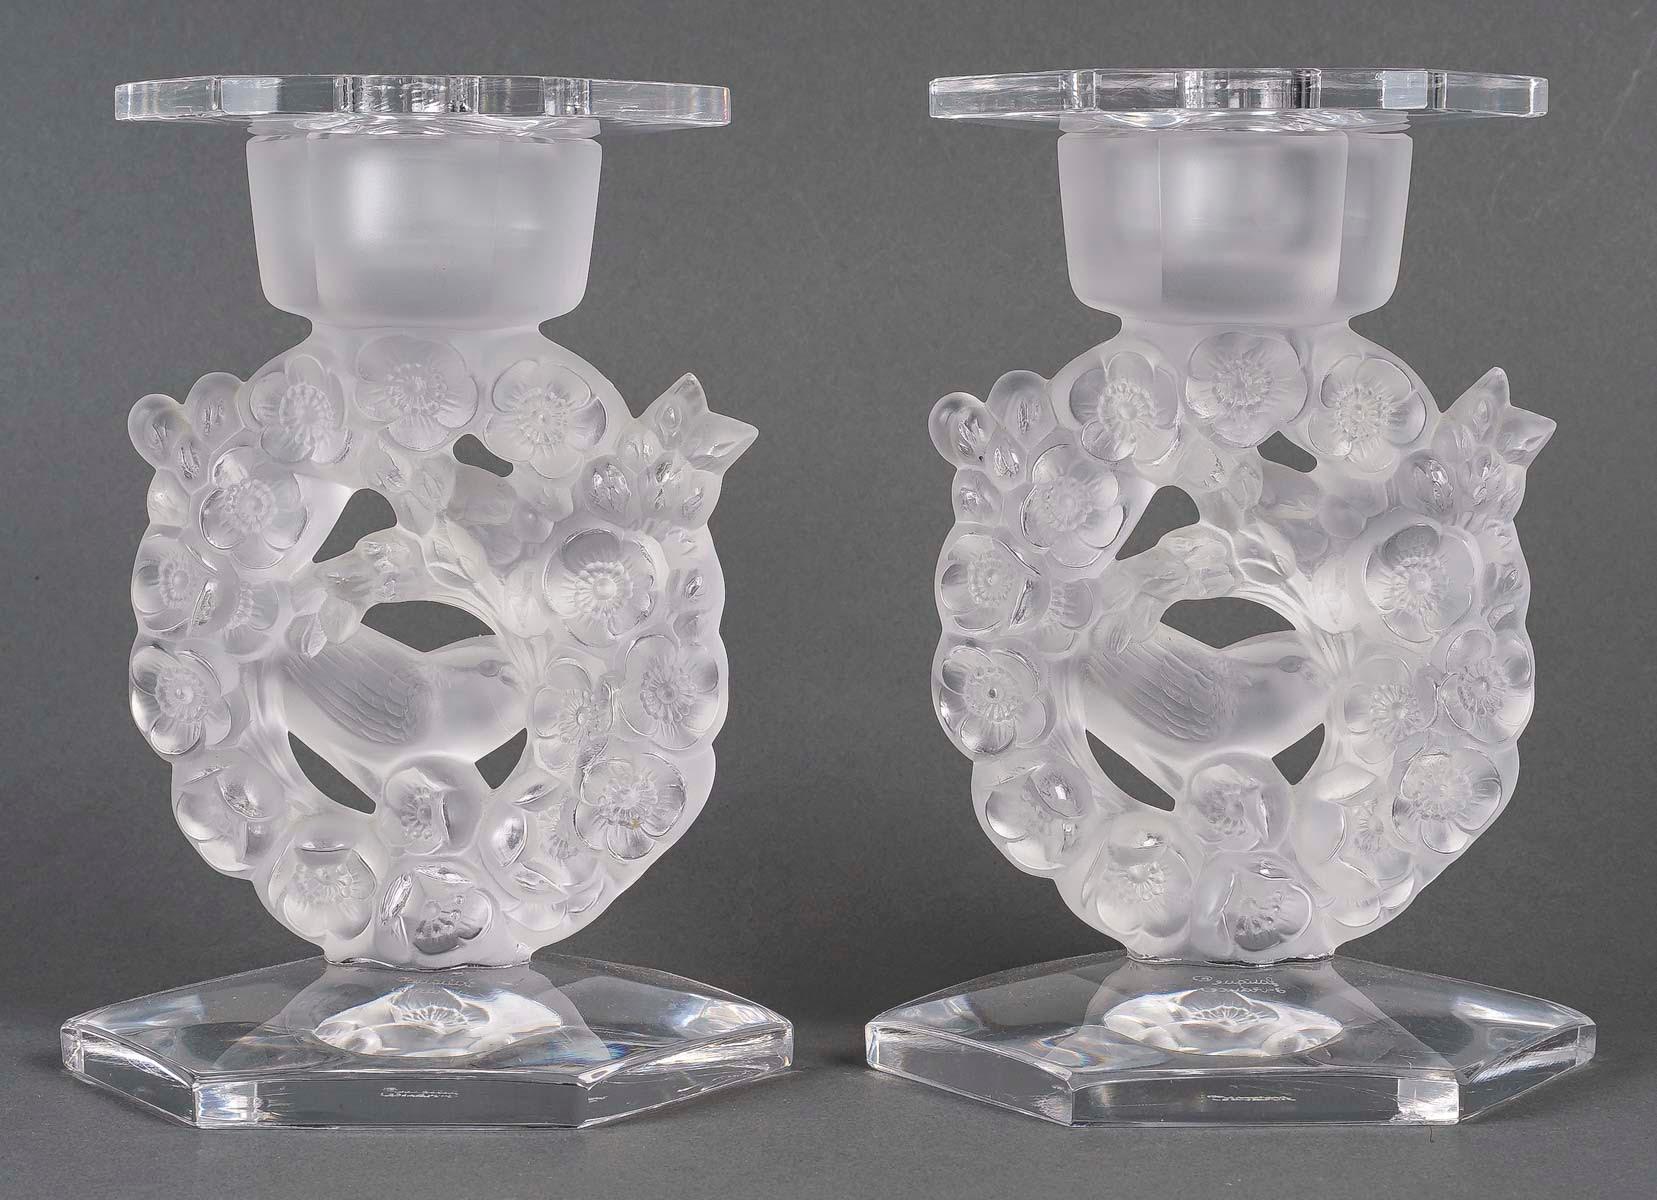 Pair of Lalique France Crystal Candelabras, 20th Century. For Sale 2